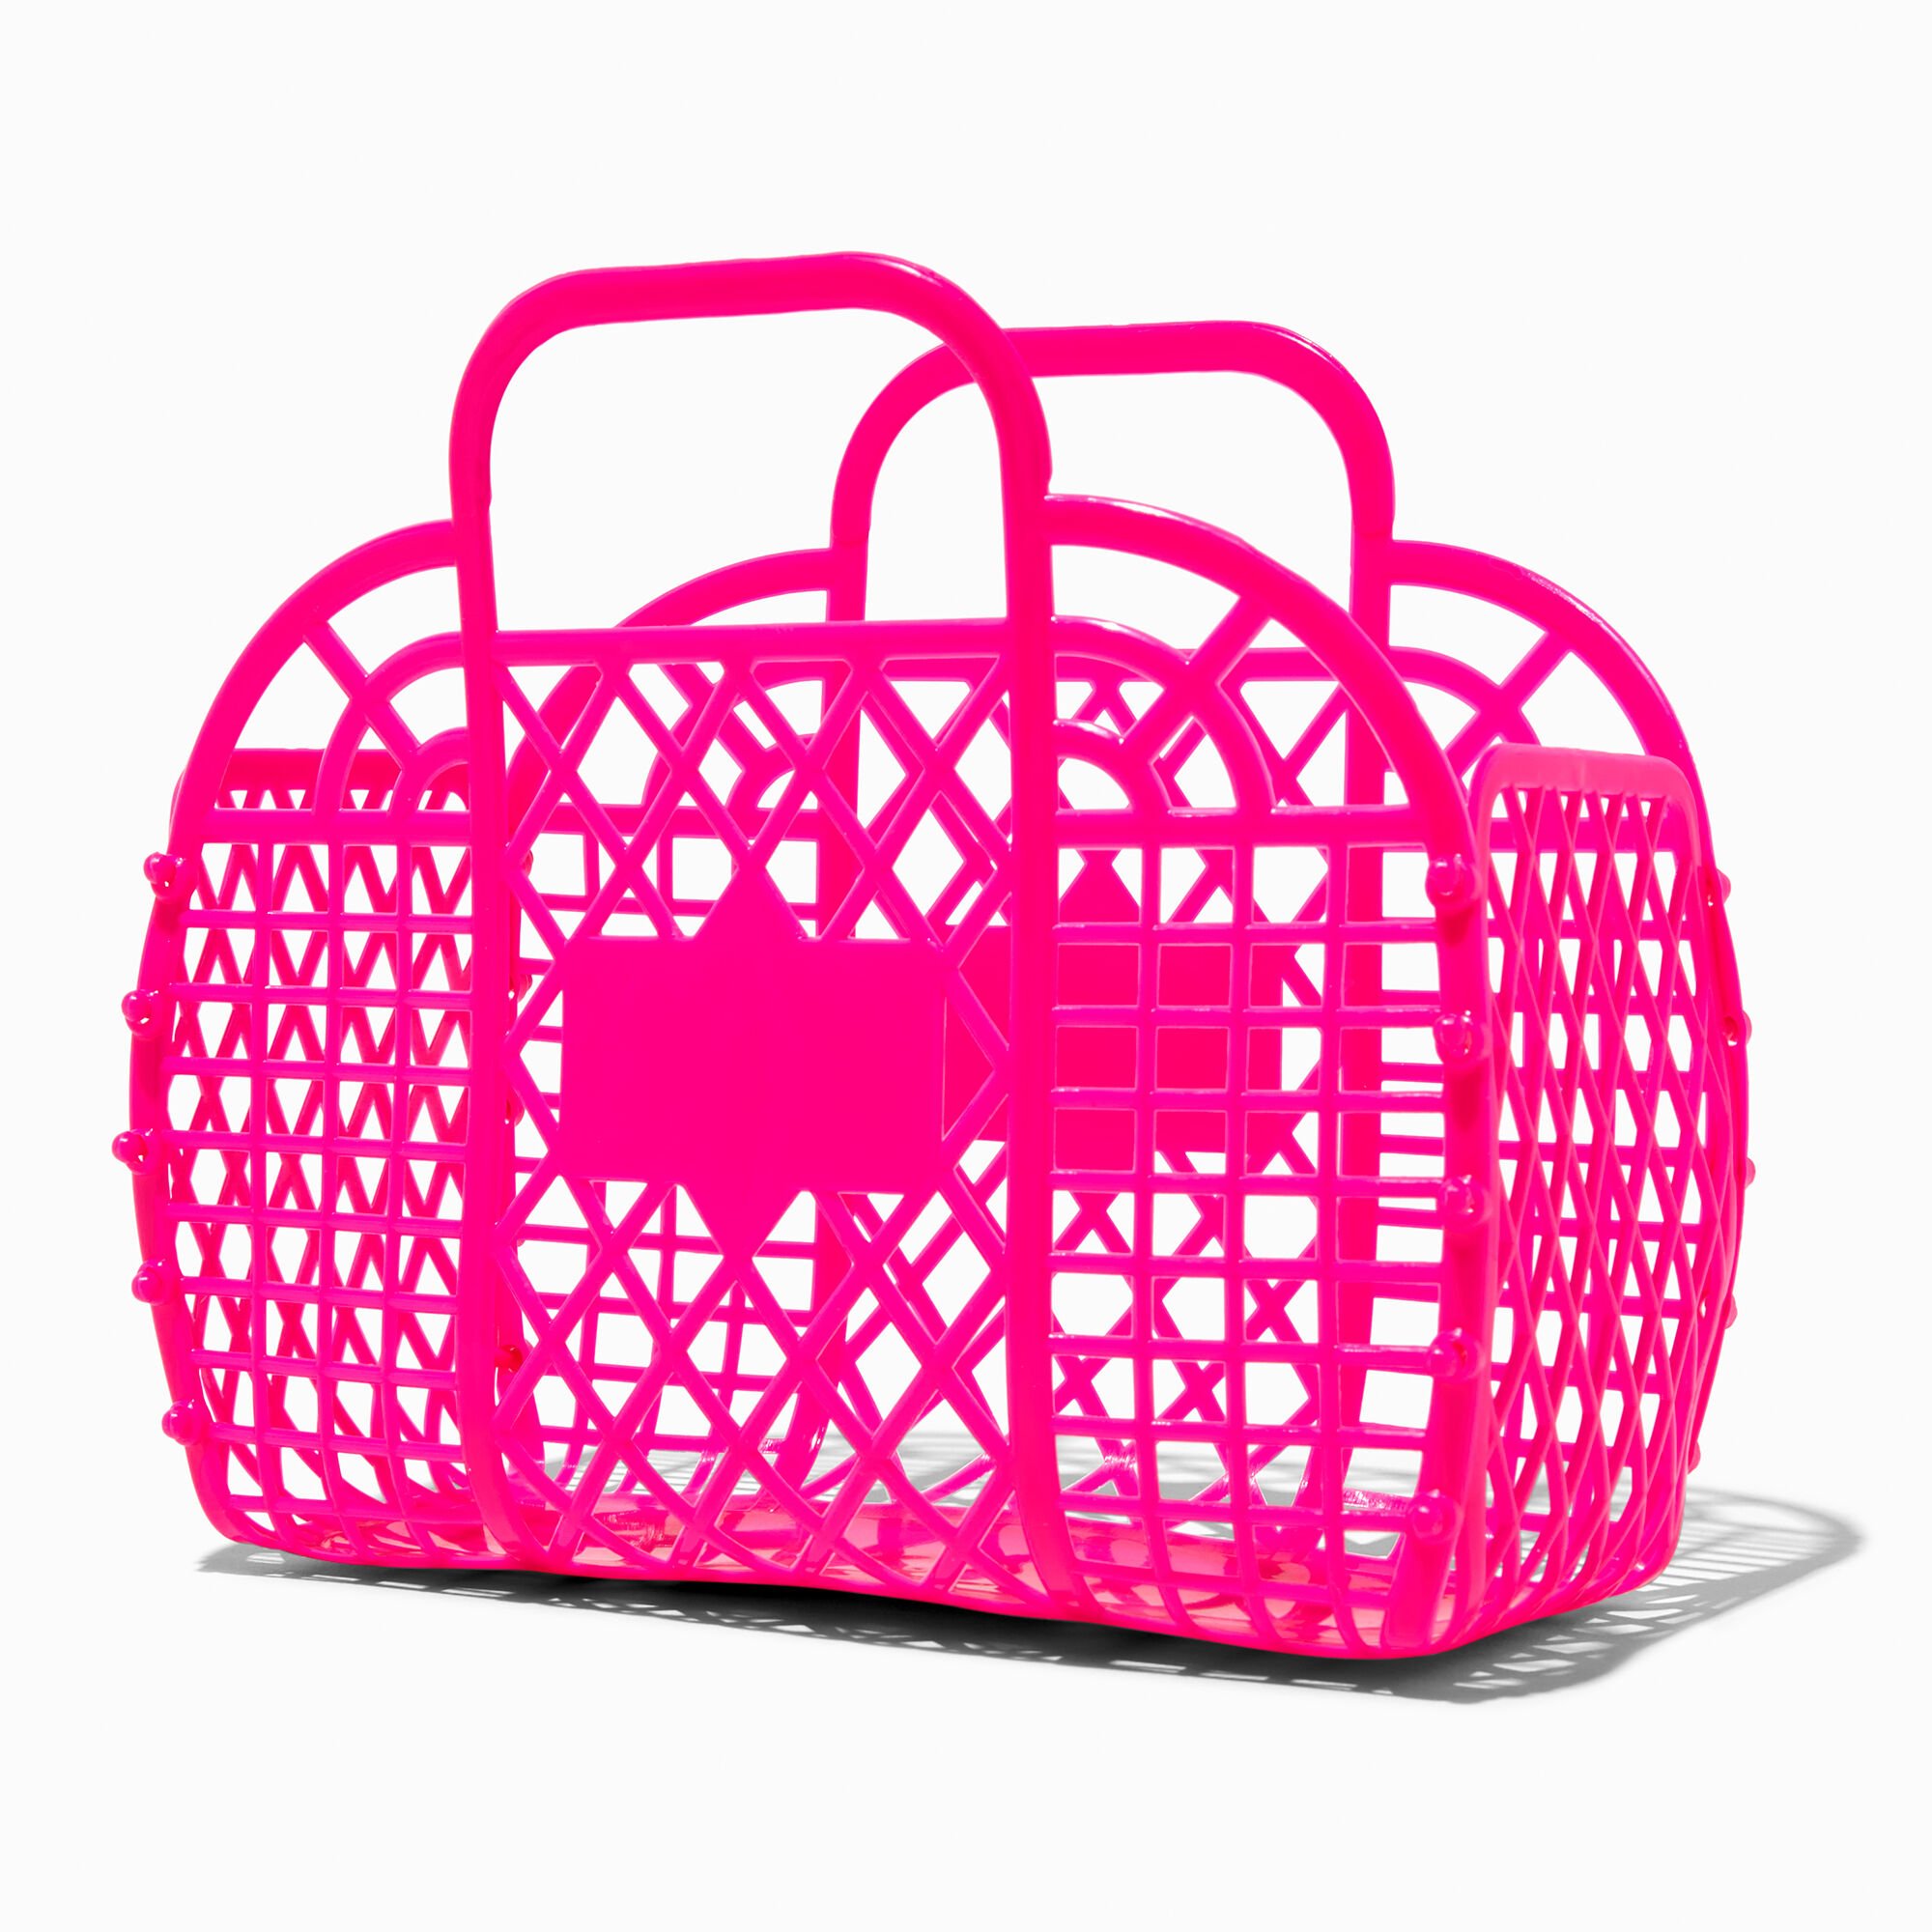 View Claires Club Jelly Tote Bag Pink information